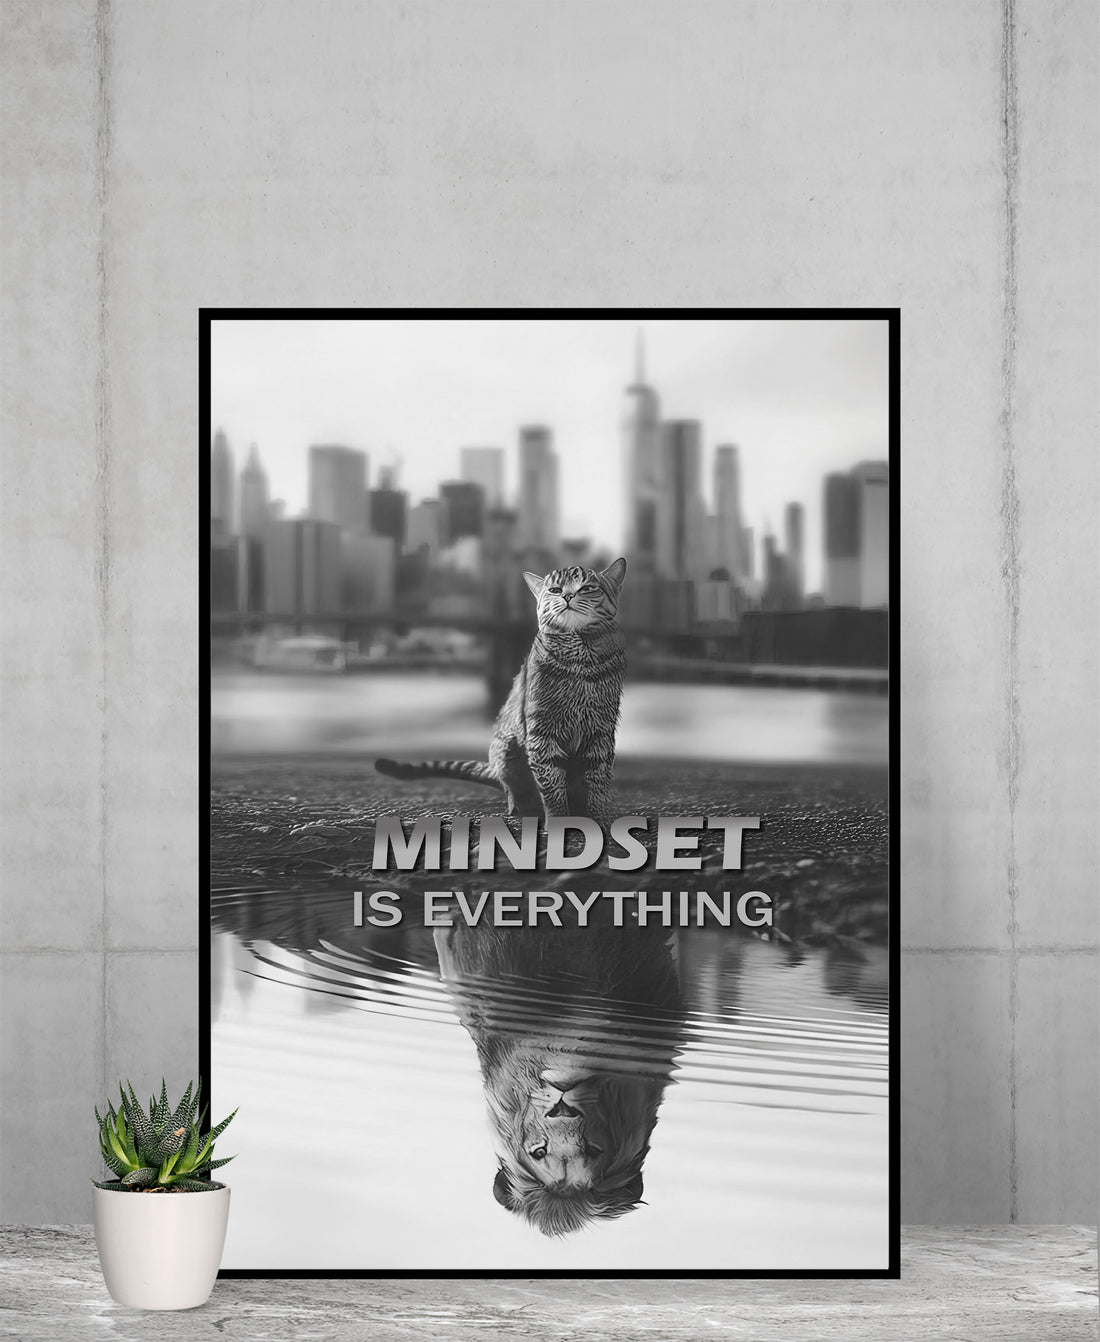 Wall Art Prints, Mindset Is Everything Poster, Cat Owner Gifts, Tiger Art, Office Decor Inspirational, House Decorations